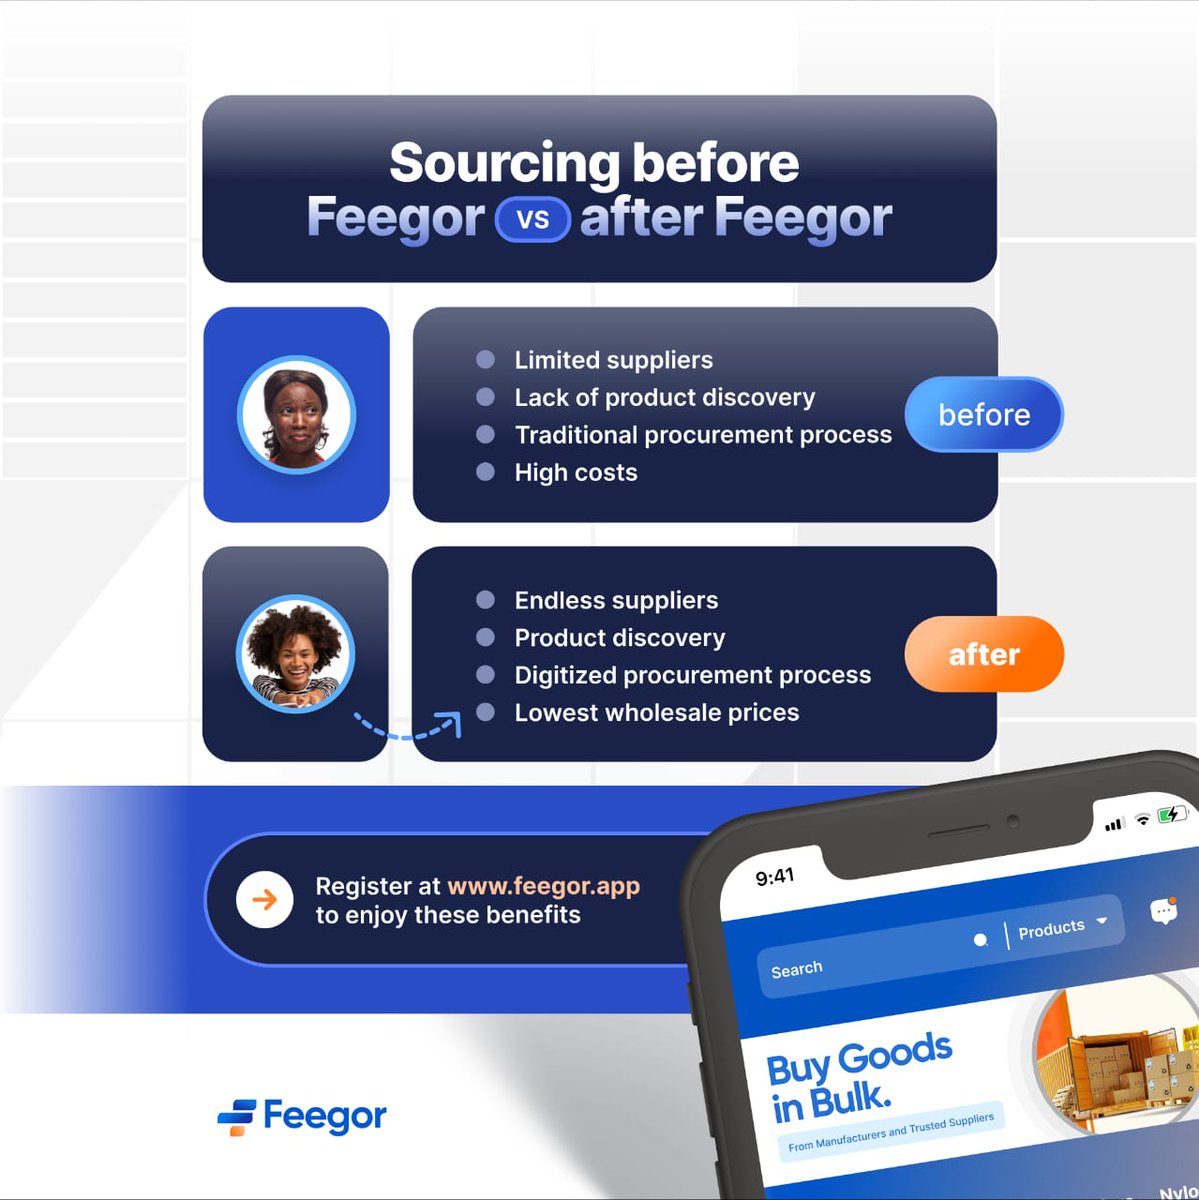 Check out the before and after experiences of sourcing for products using Feegor. What does this tell you?

Hurry and register on #Feegor at feegor.app to give your business the desired to boost to the next level. Don't be left behind 👌🏽

#BuyinBulk in style and at…